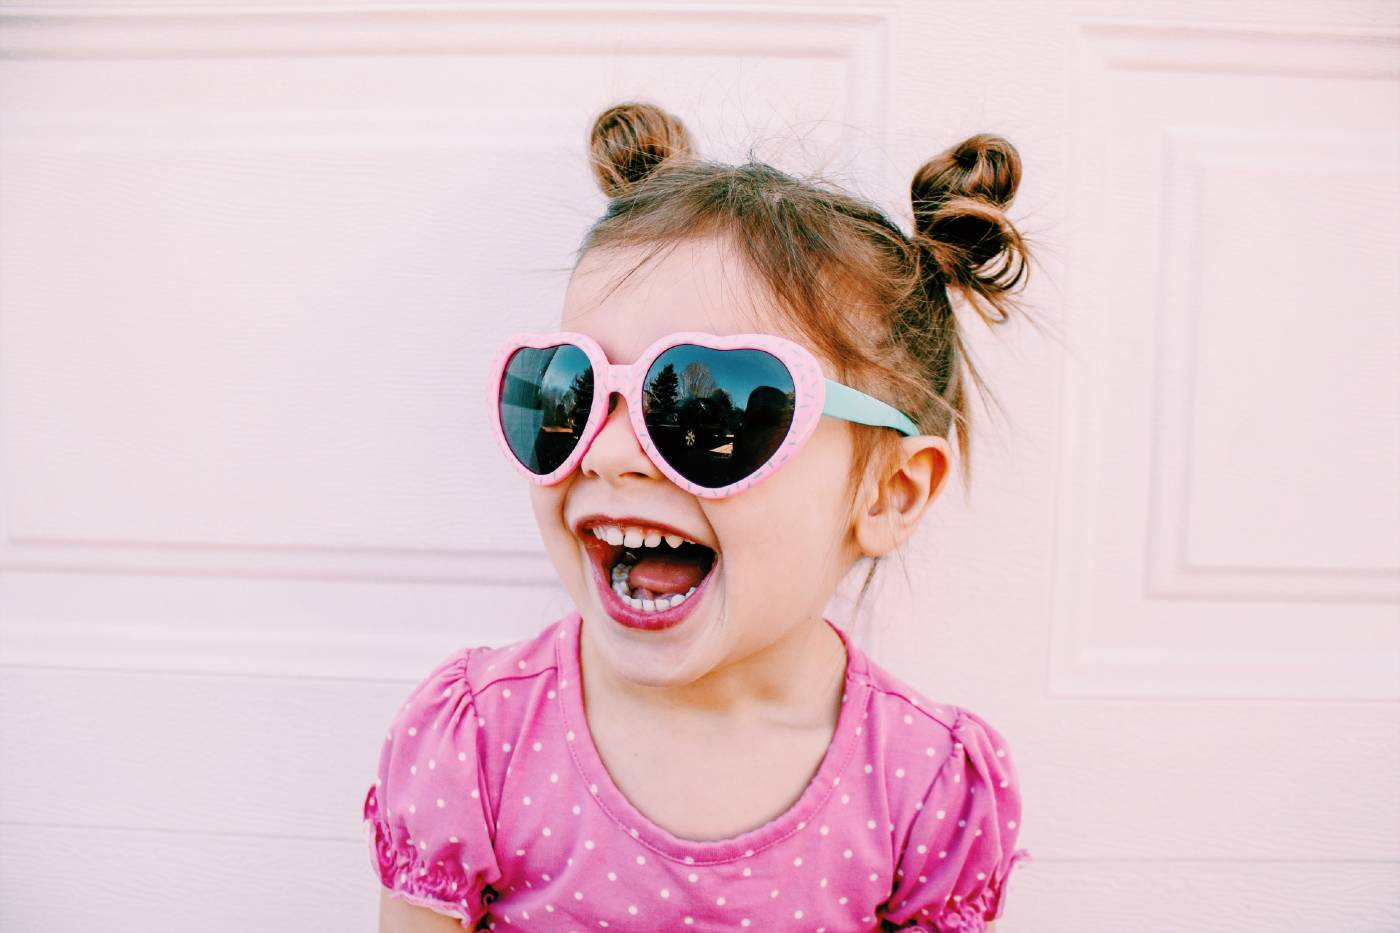 Why We Need to Teach Little Girls to Love Themselves at an Early Age